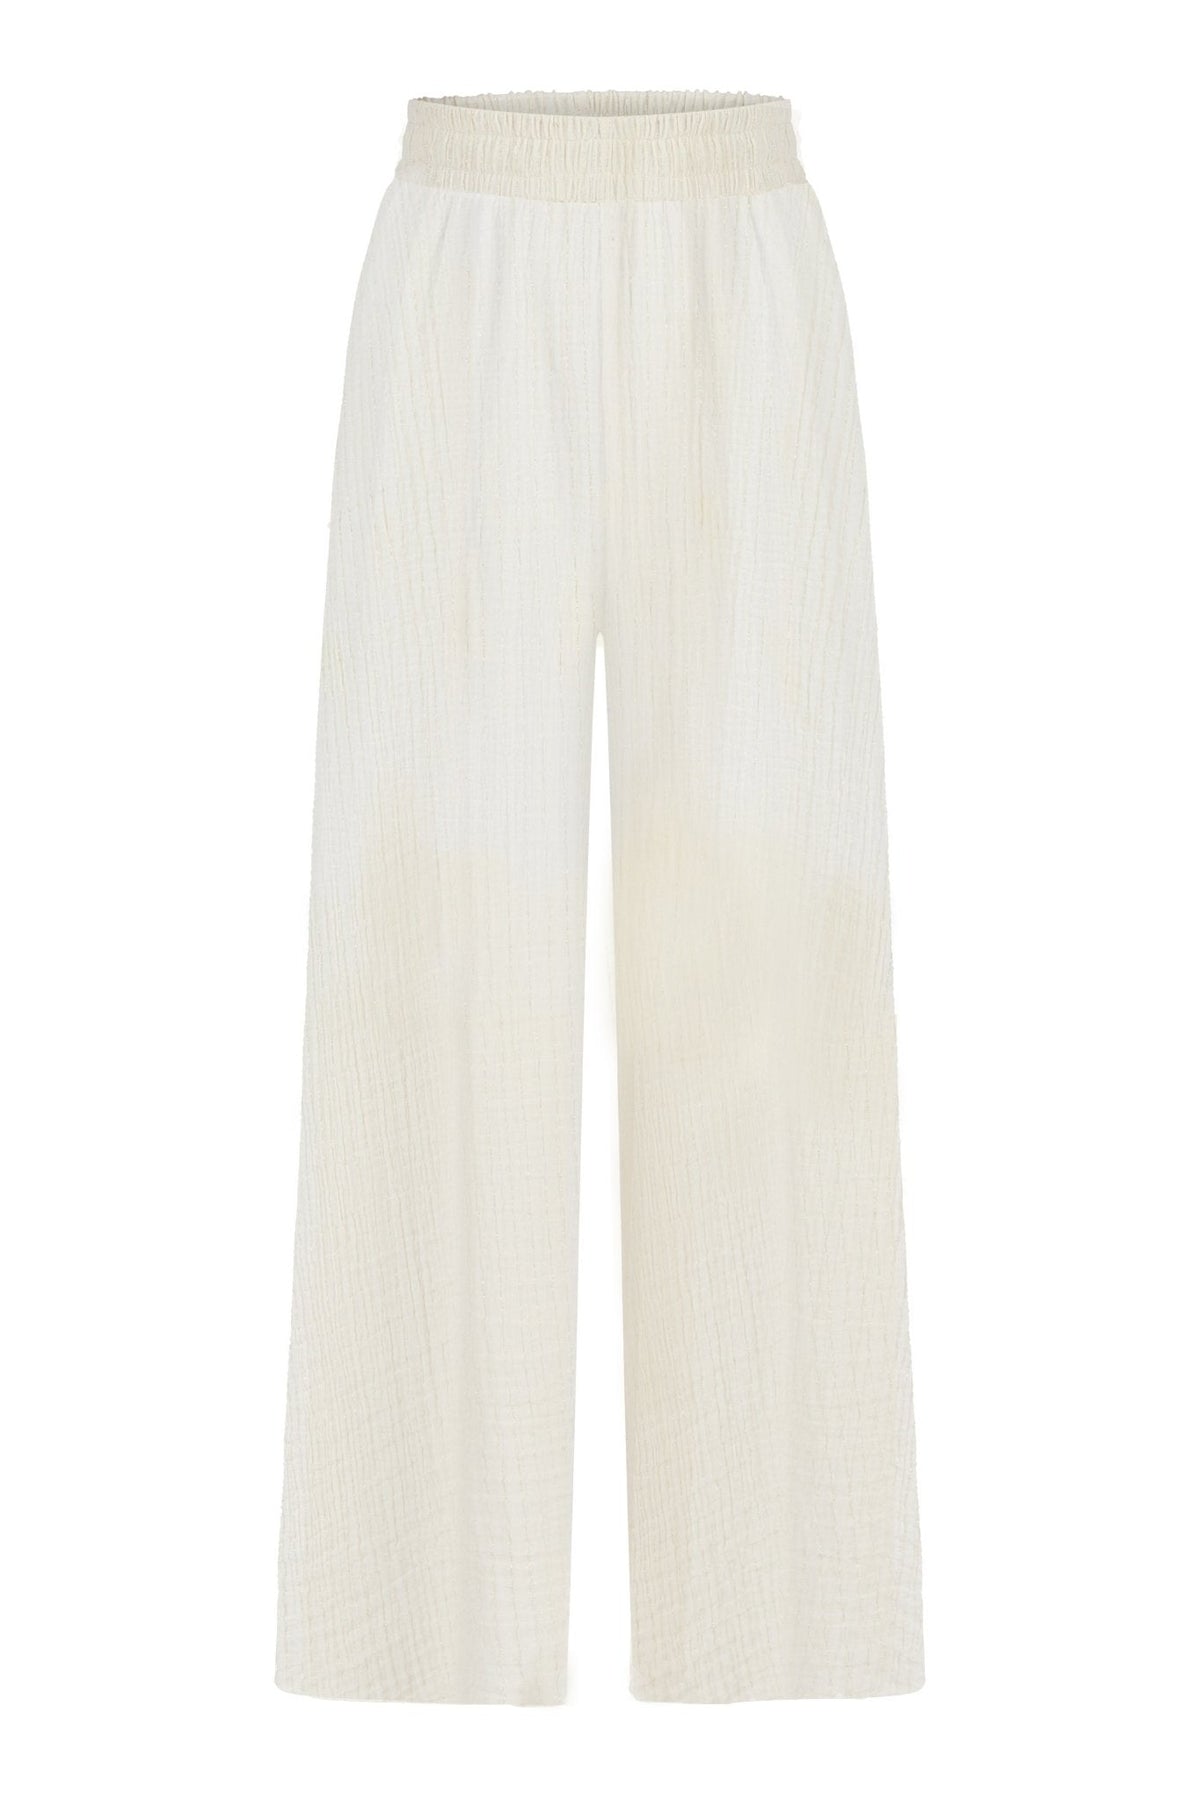 THE HAND LOOM Skye Palazzo 100% Organic Cotton Womens Pants - Natural With Gold Stripes